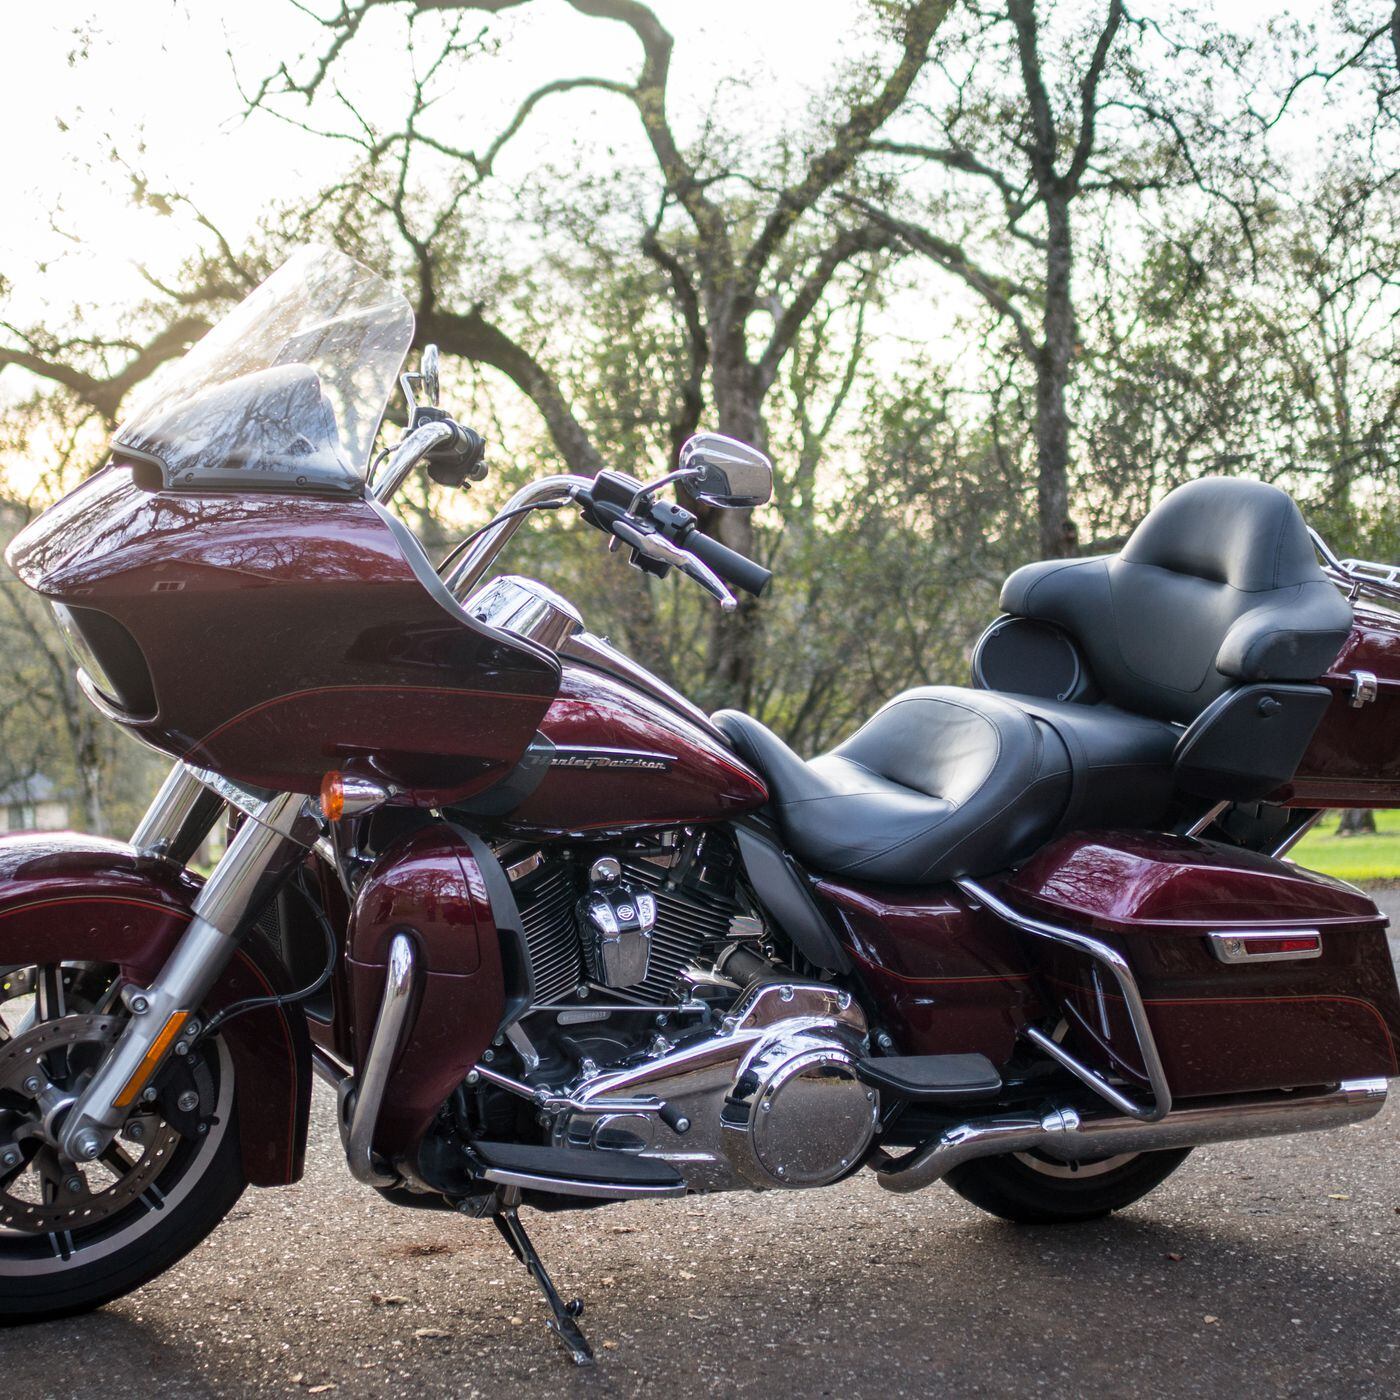 2017 Harley Davidson Road Glide Ultra What I Ve Been Riding Cycle World